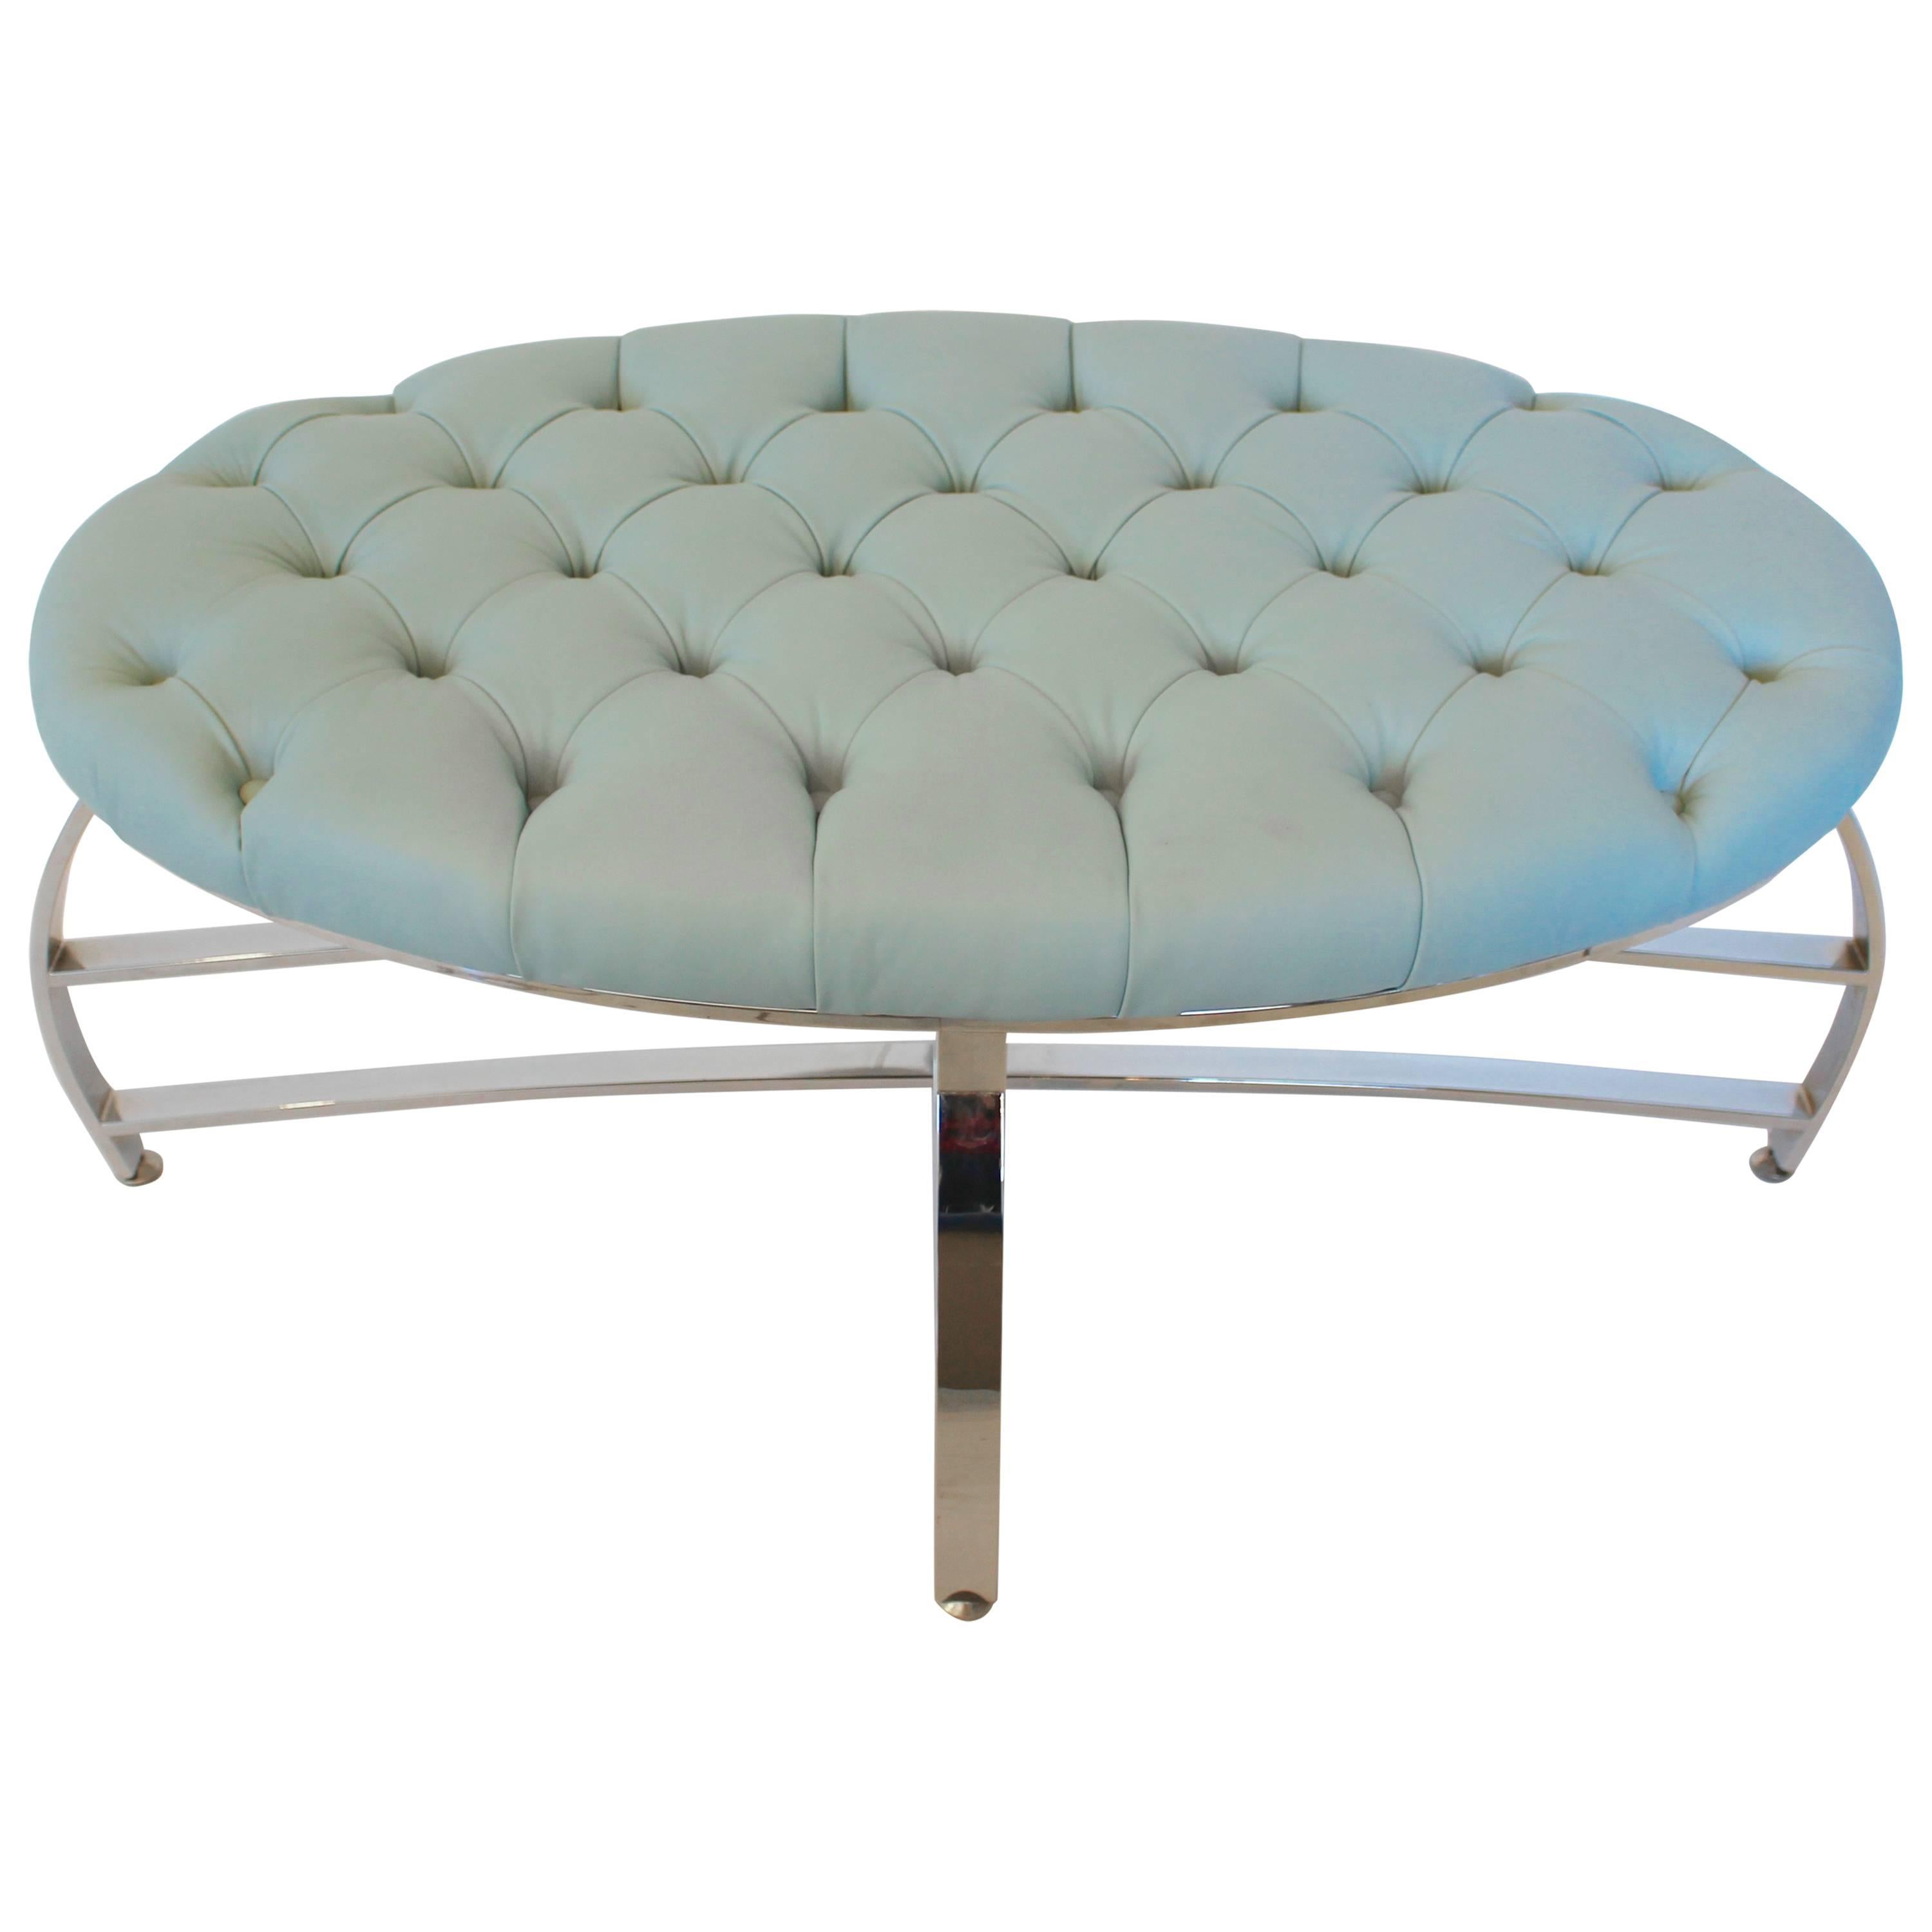 Contemporary Teal Leather Button-Tufted Oval Ottoman with Modern Chrome Frame For Sale